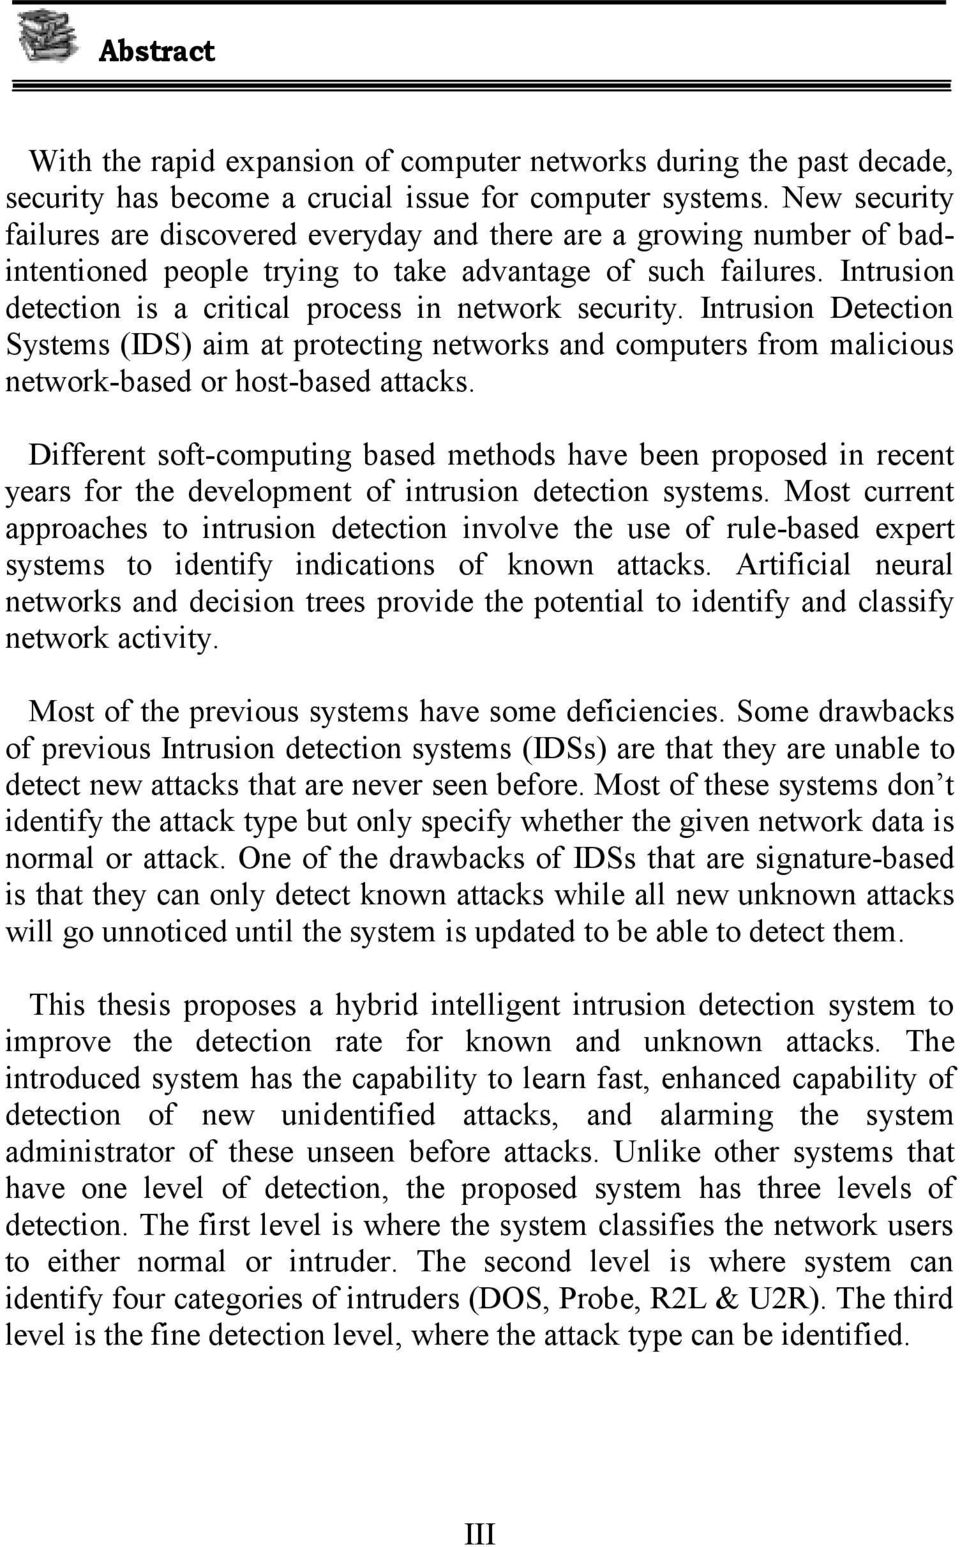 Intrusion detection is a critical process in network security. Intrusion Detection Systems (IDS) aim at protecting networks and computers from malicious network-based or host-based attacks.